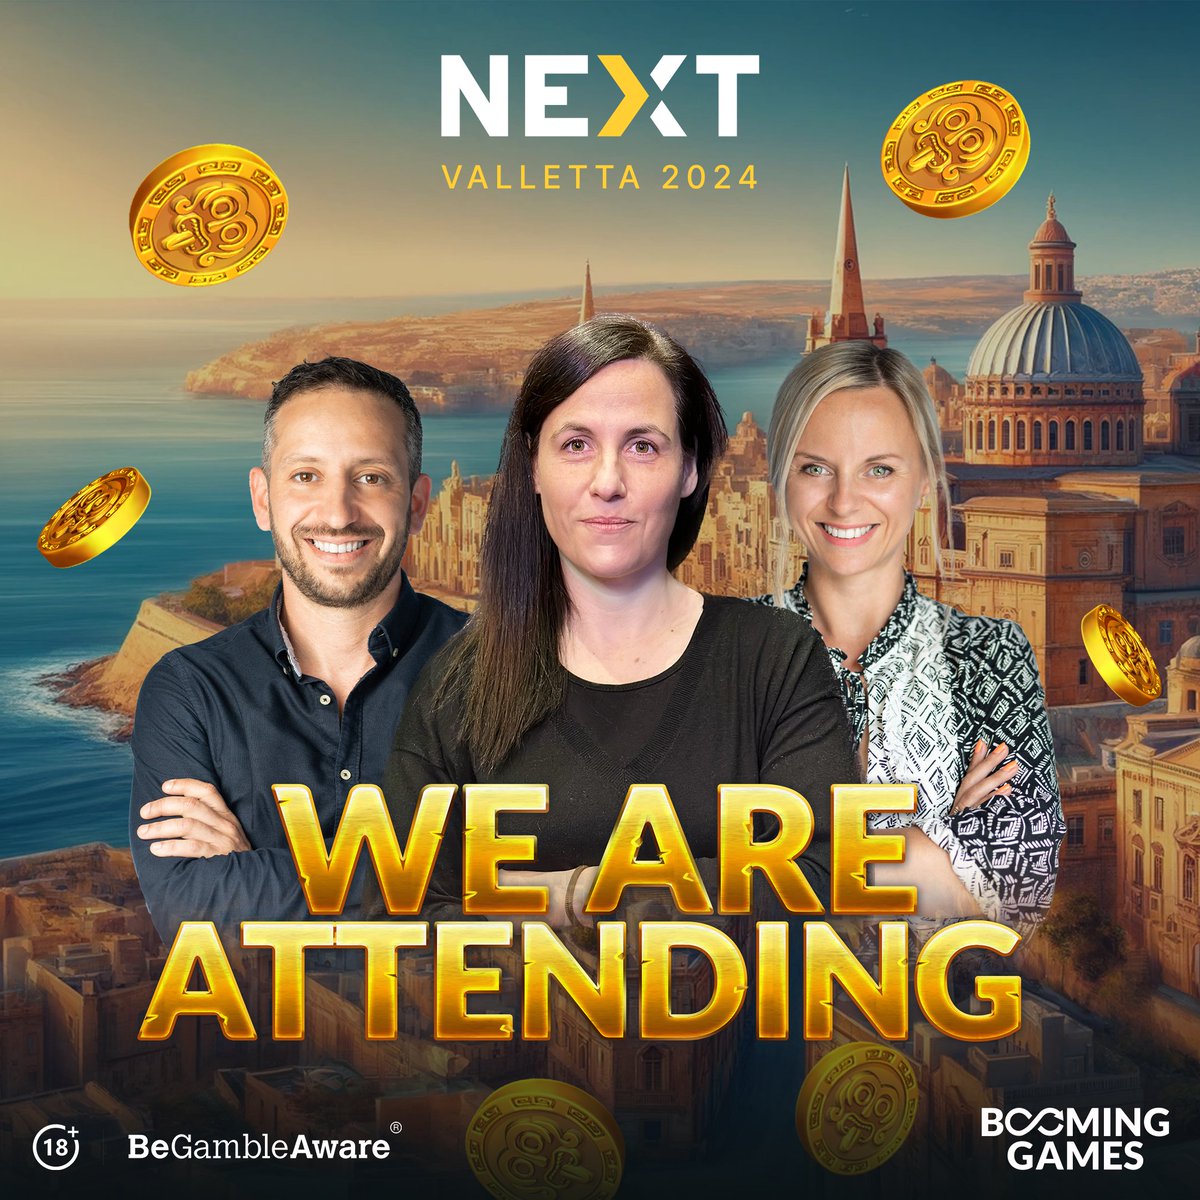 Meet some of our awesome Account Management team! They're attending Next.io Valletta, ready to chat about our products and our exciting collaboration with Ronaldinho. Book a meeting today to learn more! #games #casinogames #conference #NextValletta #SeeYouSoon